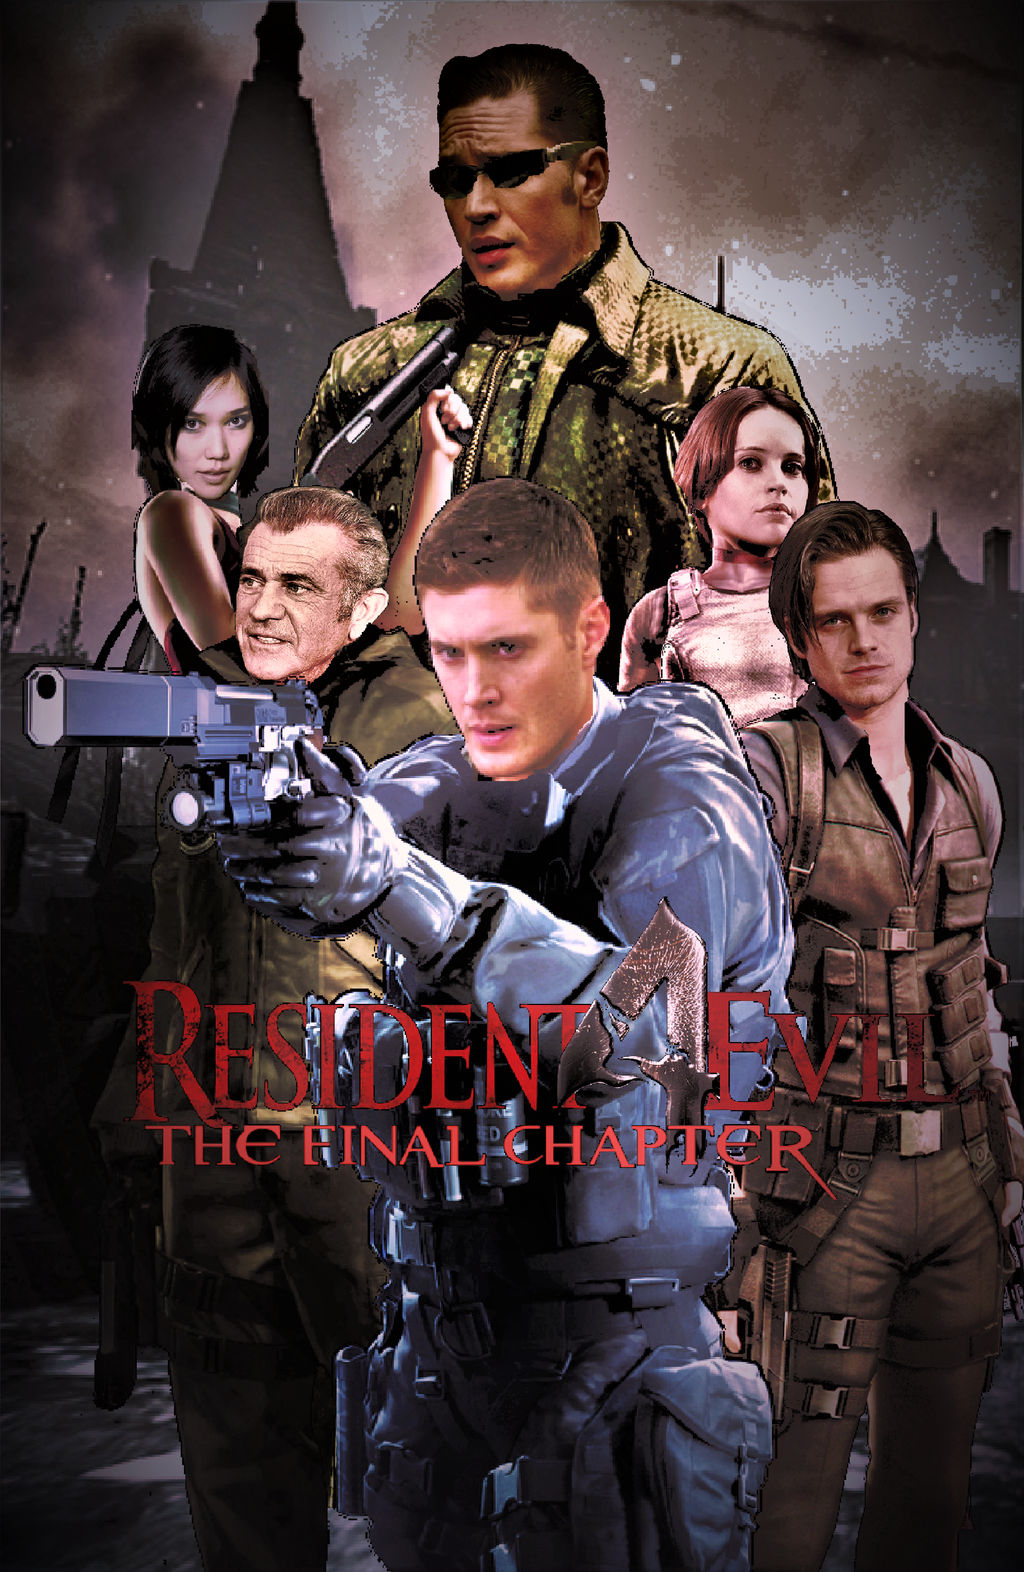 Resident Evil 4 : The Final Chapter -Poster by nicolascage49 on DeviantArt